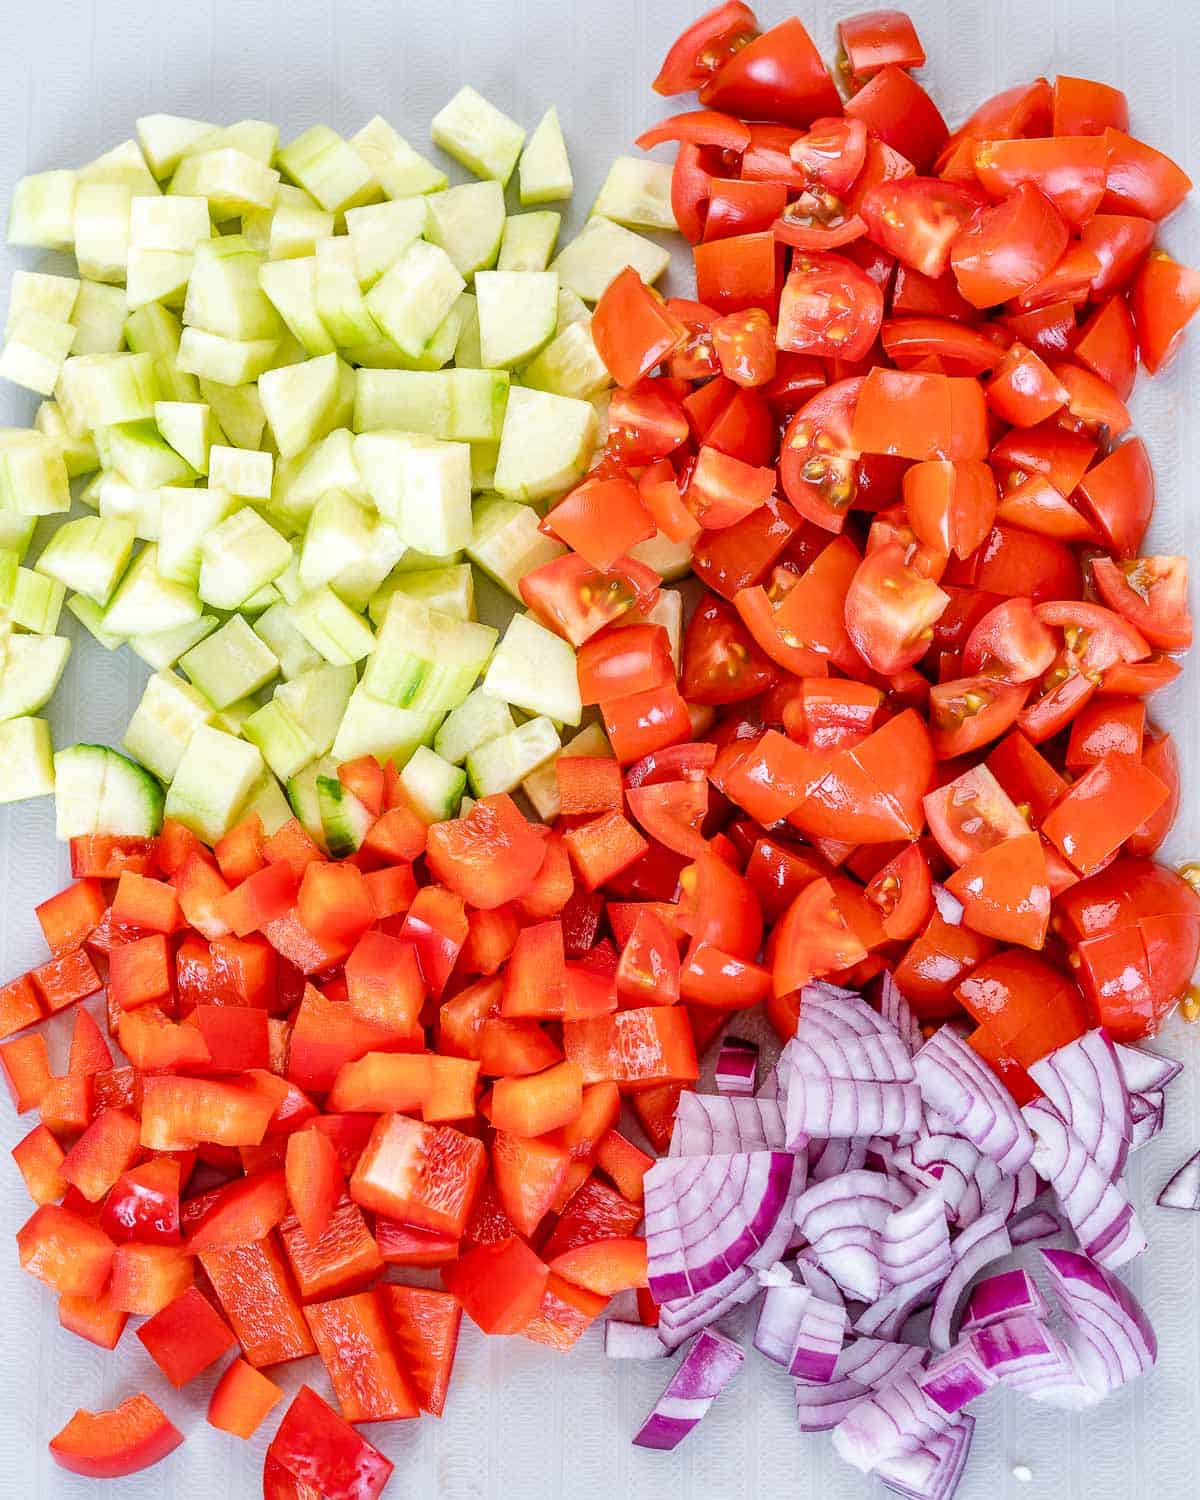 chopped red onions, tomatoes, cucumbers on cutting board